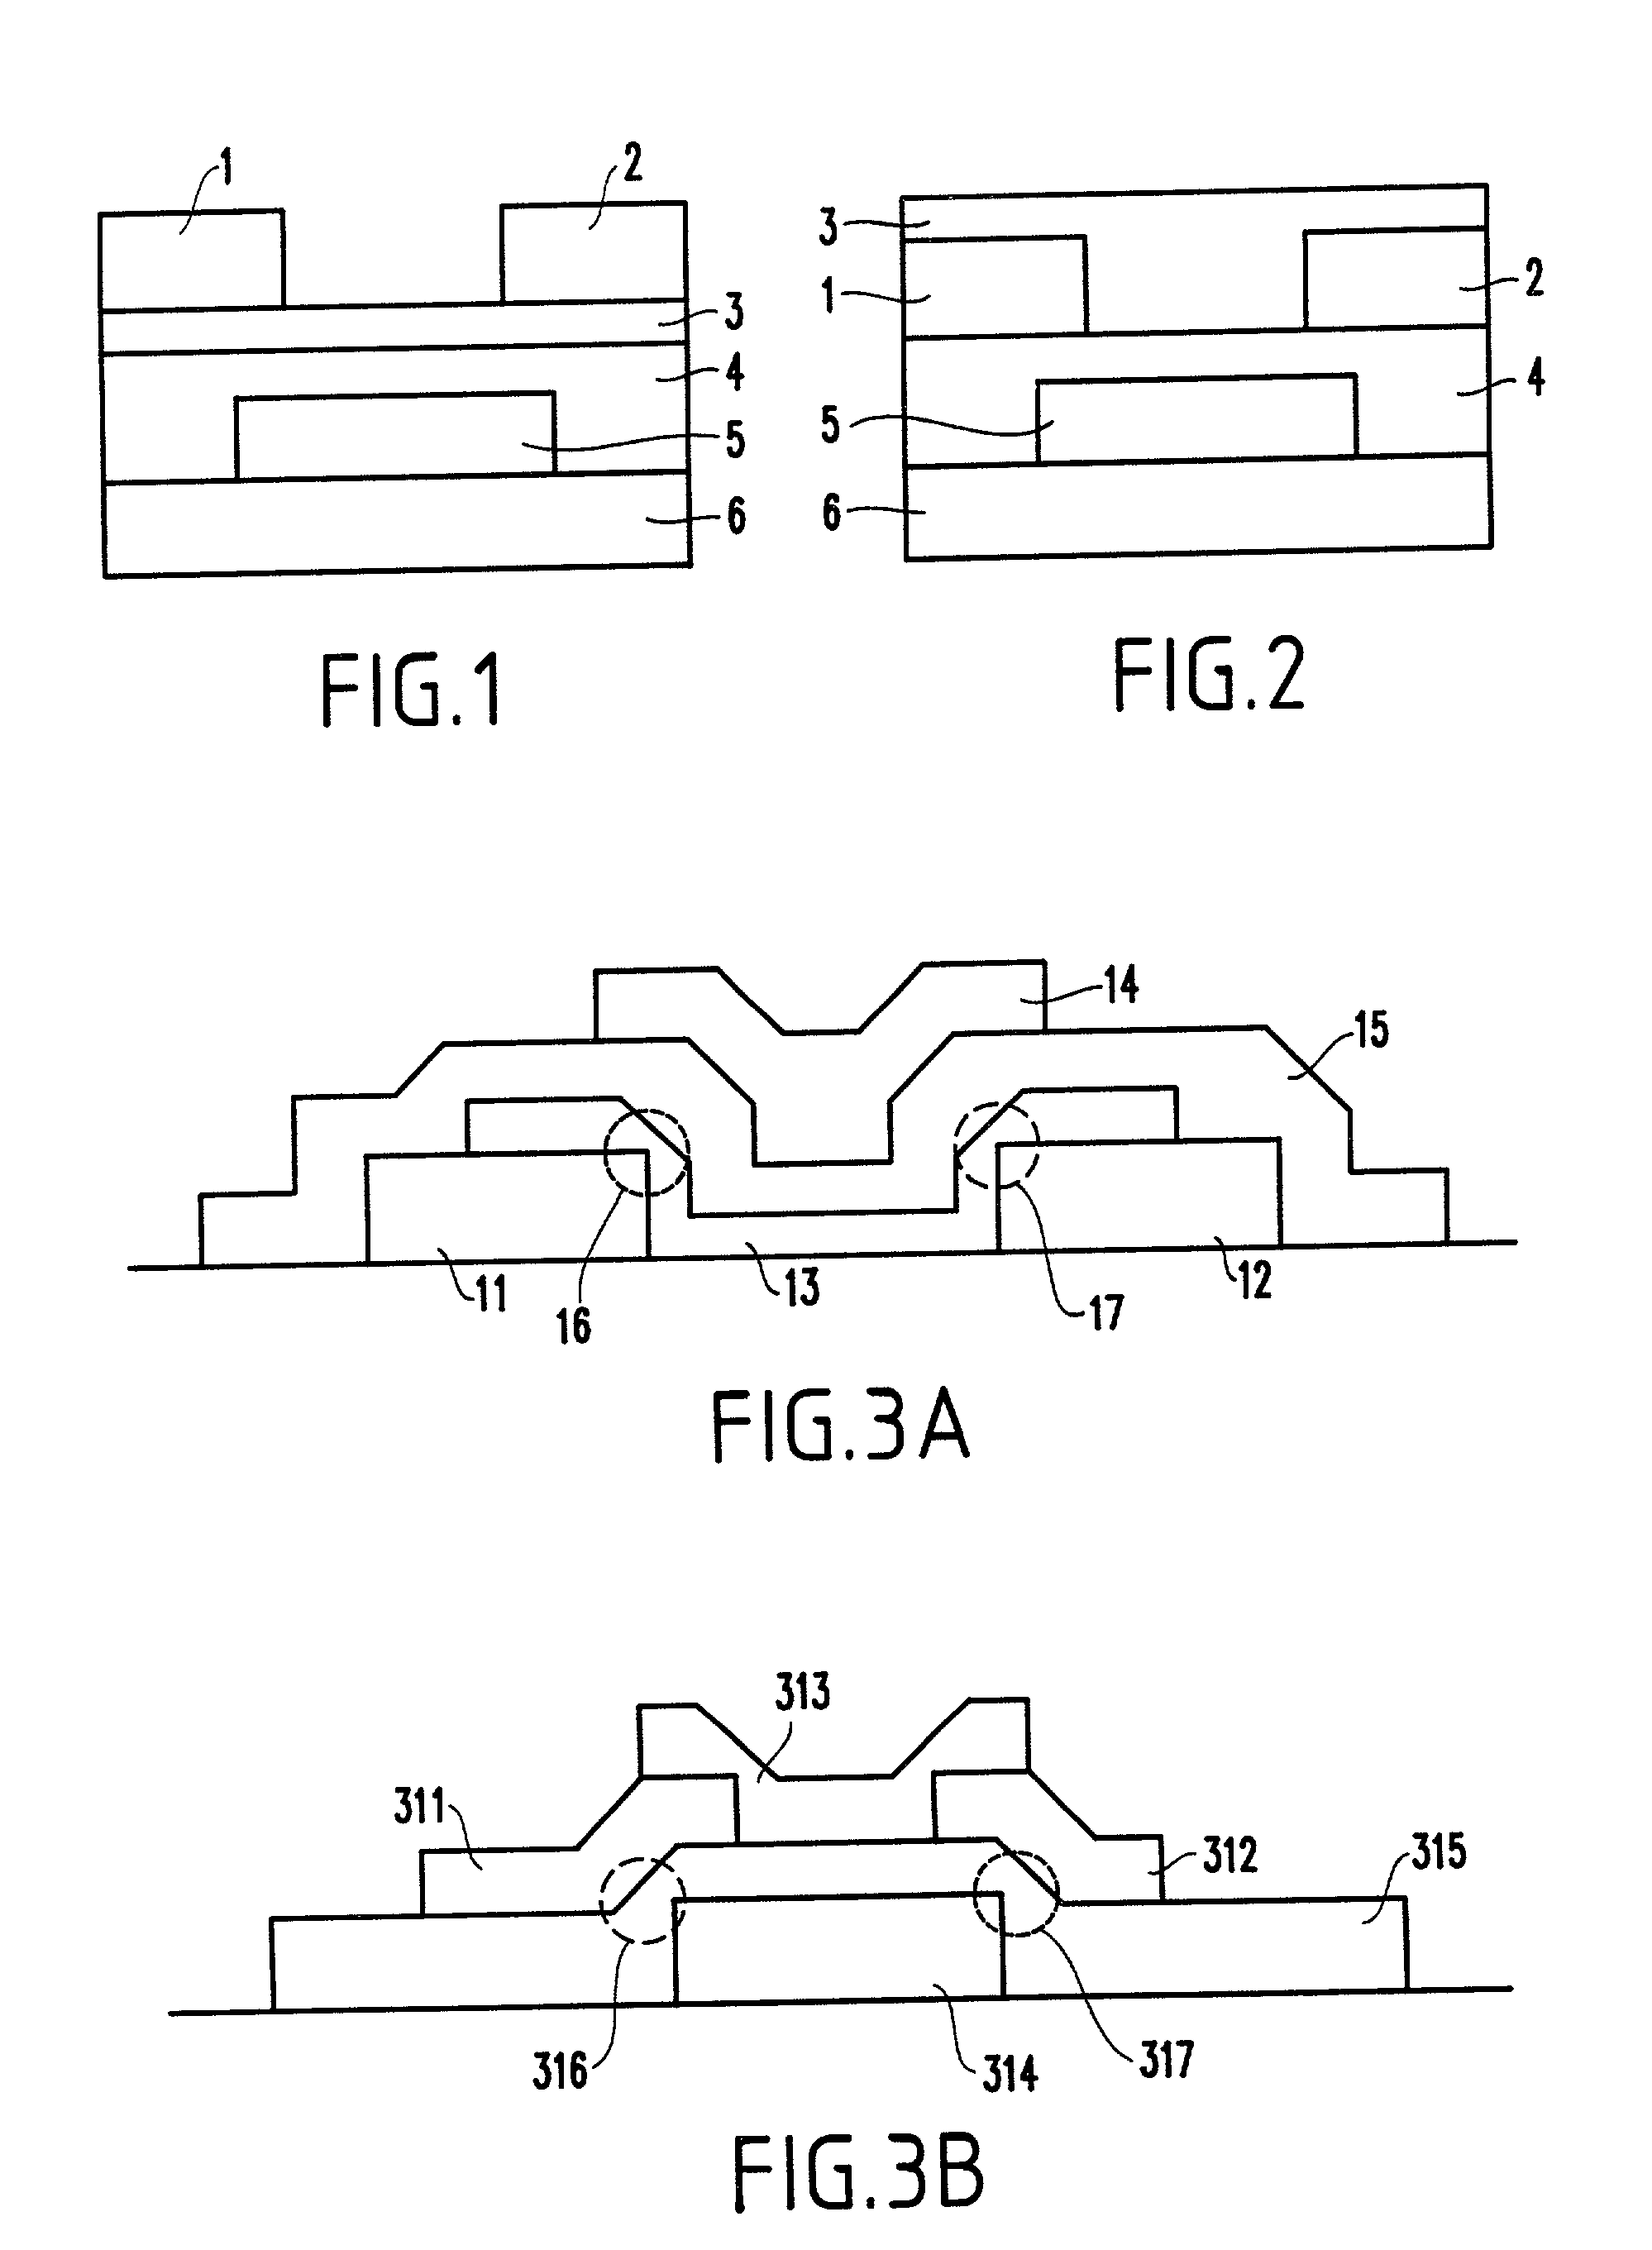 Method of forming a planar polymer transistor using substrate bonding techniques